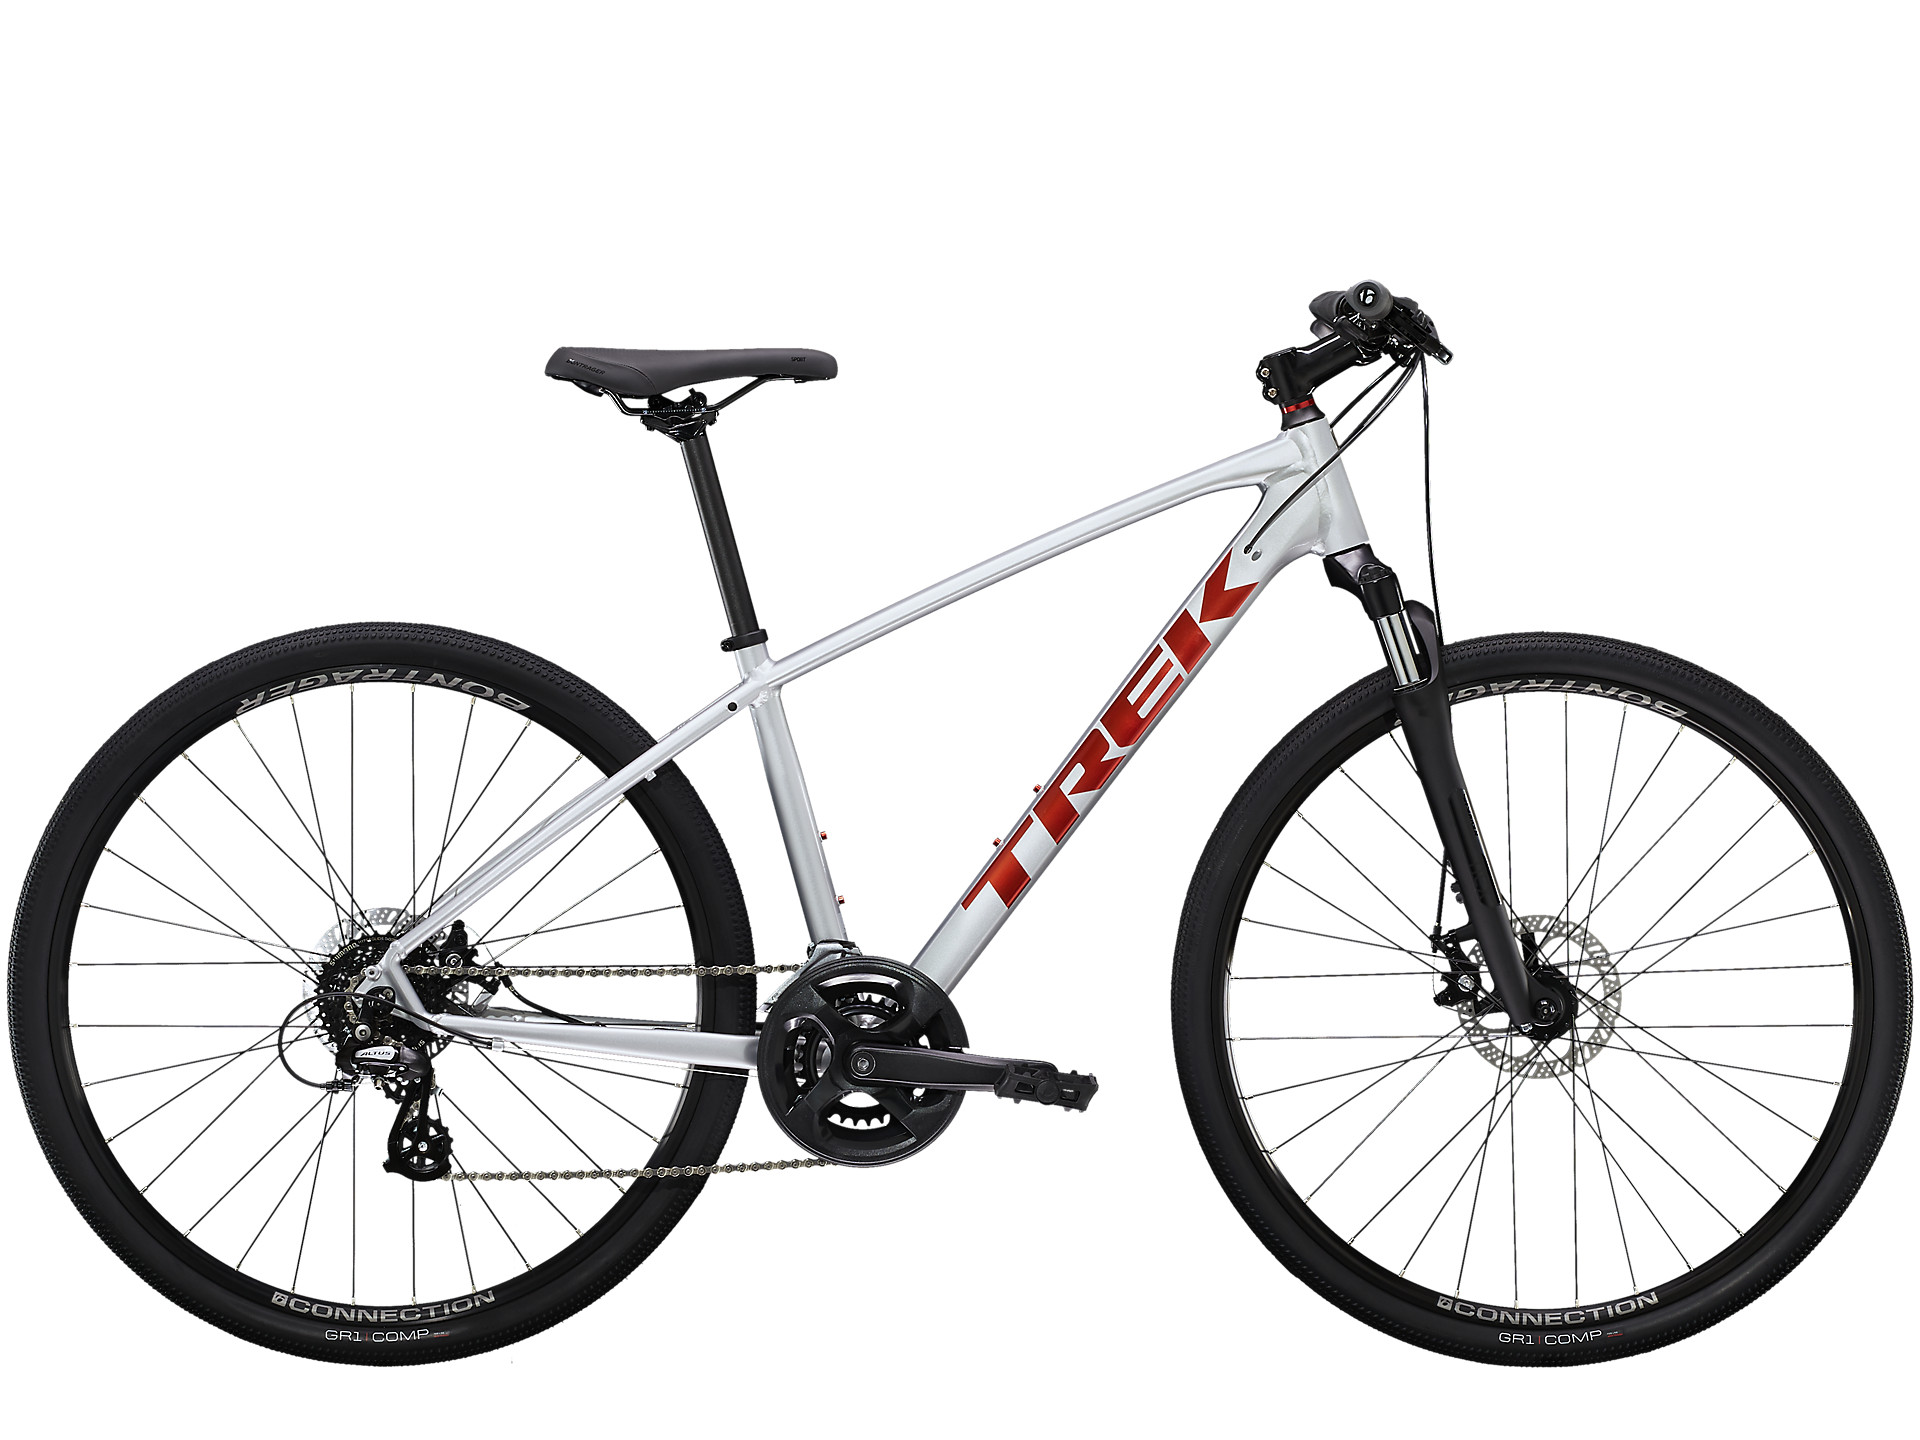 <a href="https://cycles-clement.be/product/dual-sport-1-l-quicksilver/">Dual Sport 1 L Quicksilver</a>